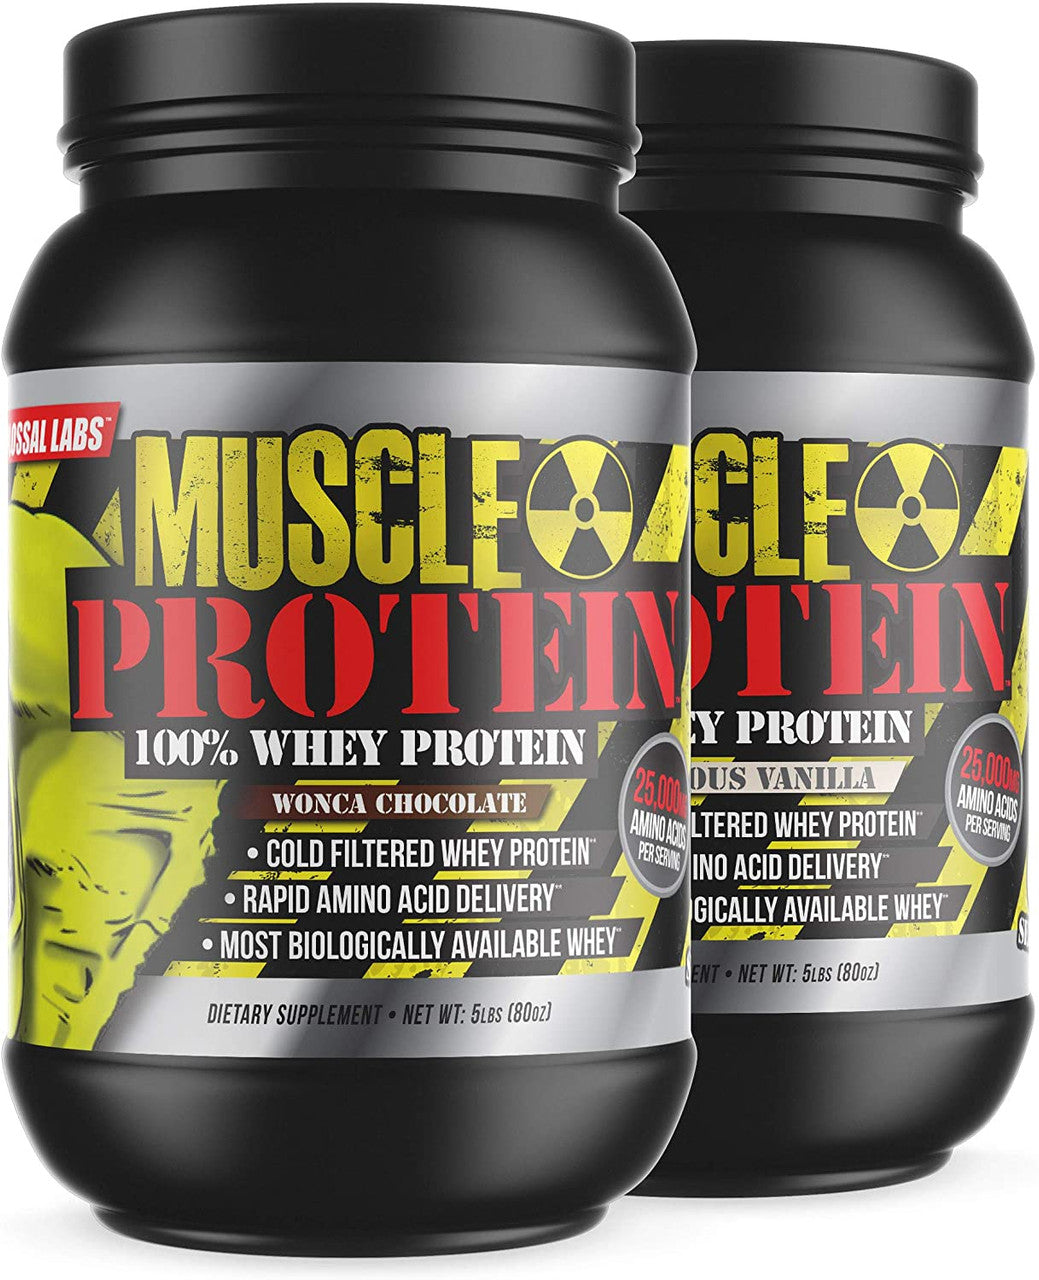 Colossal Labs Muscle Protein 2 bottles